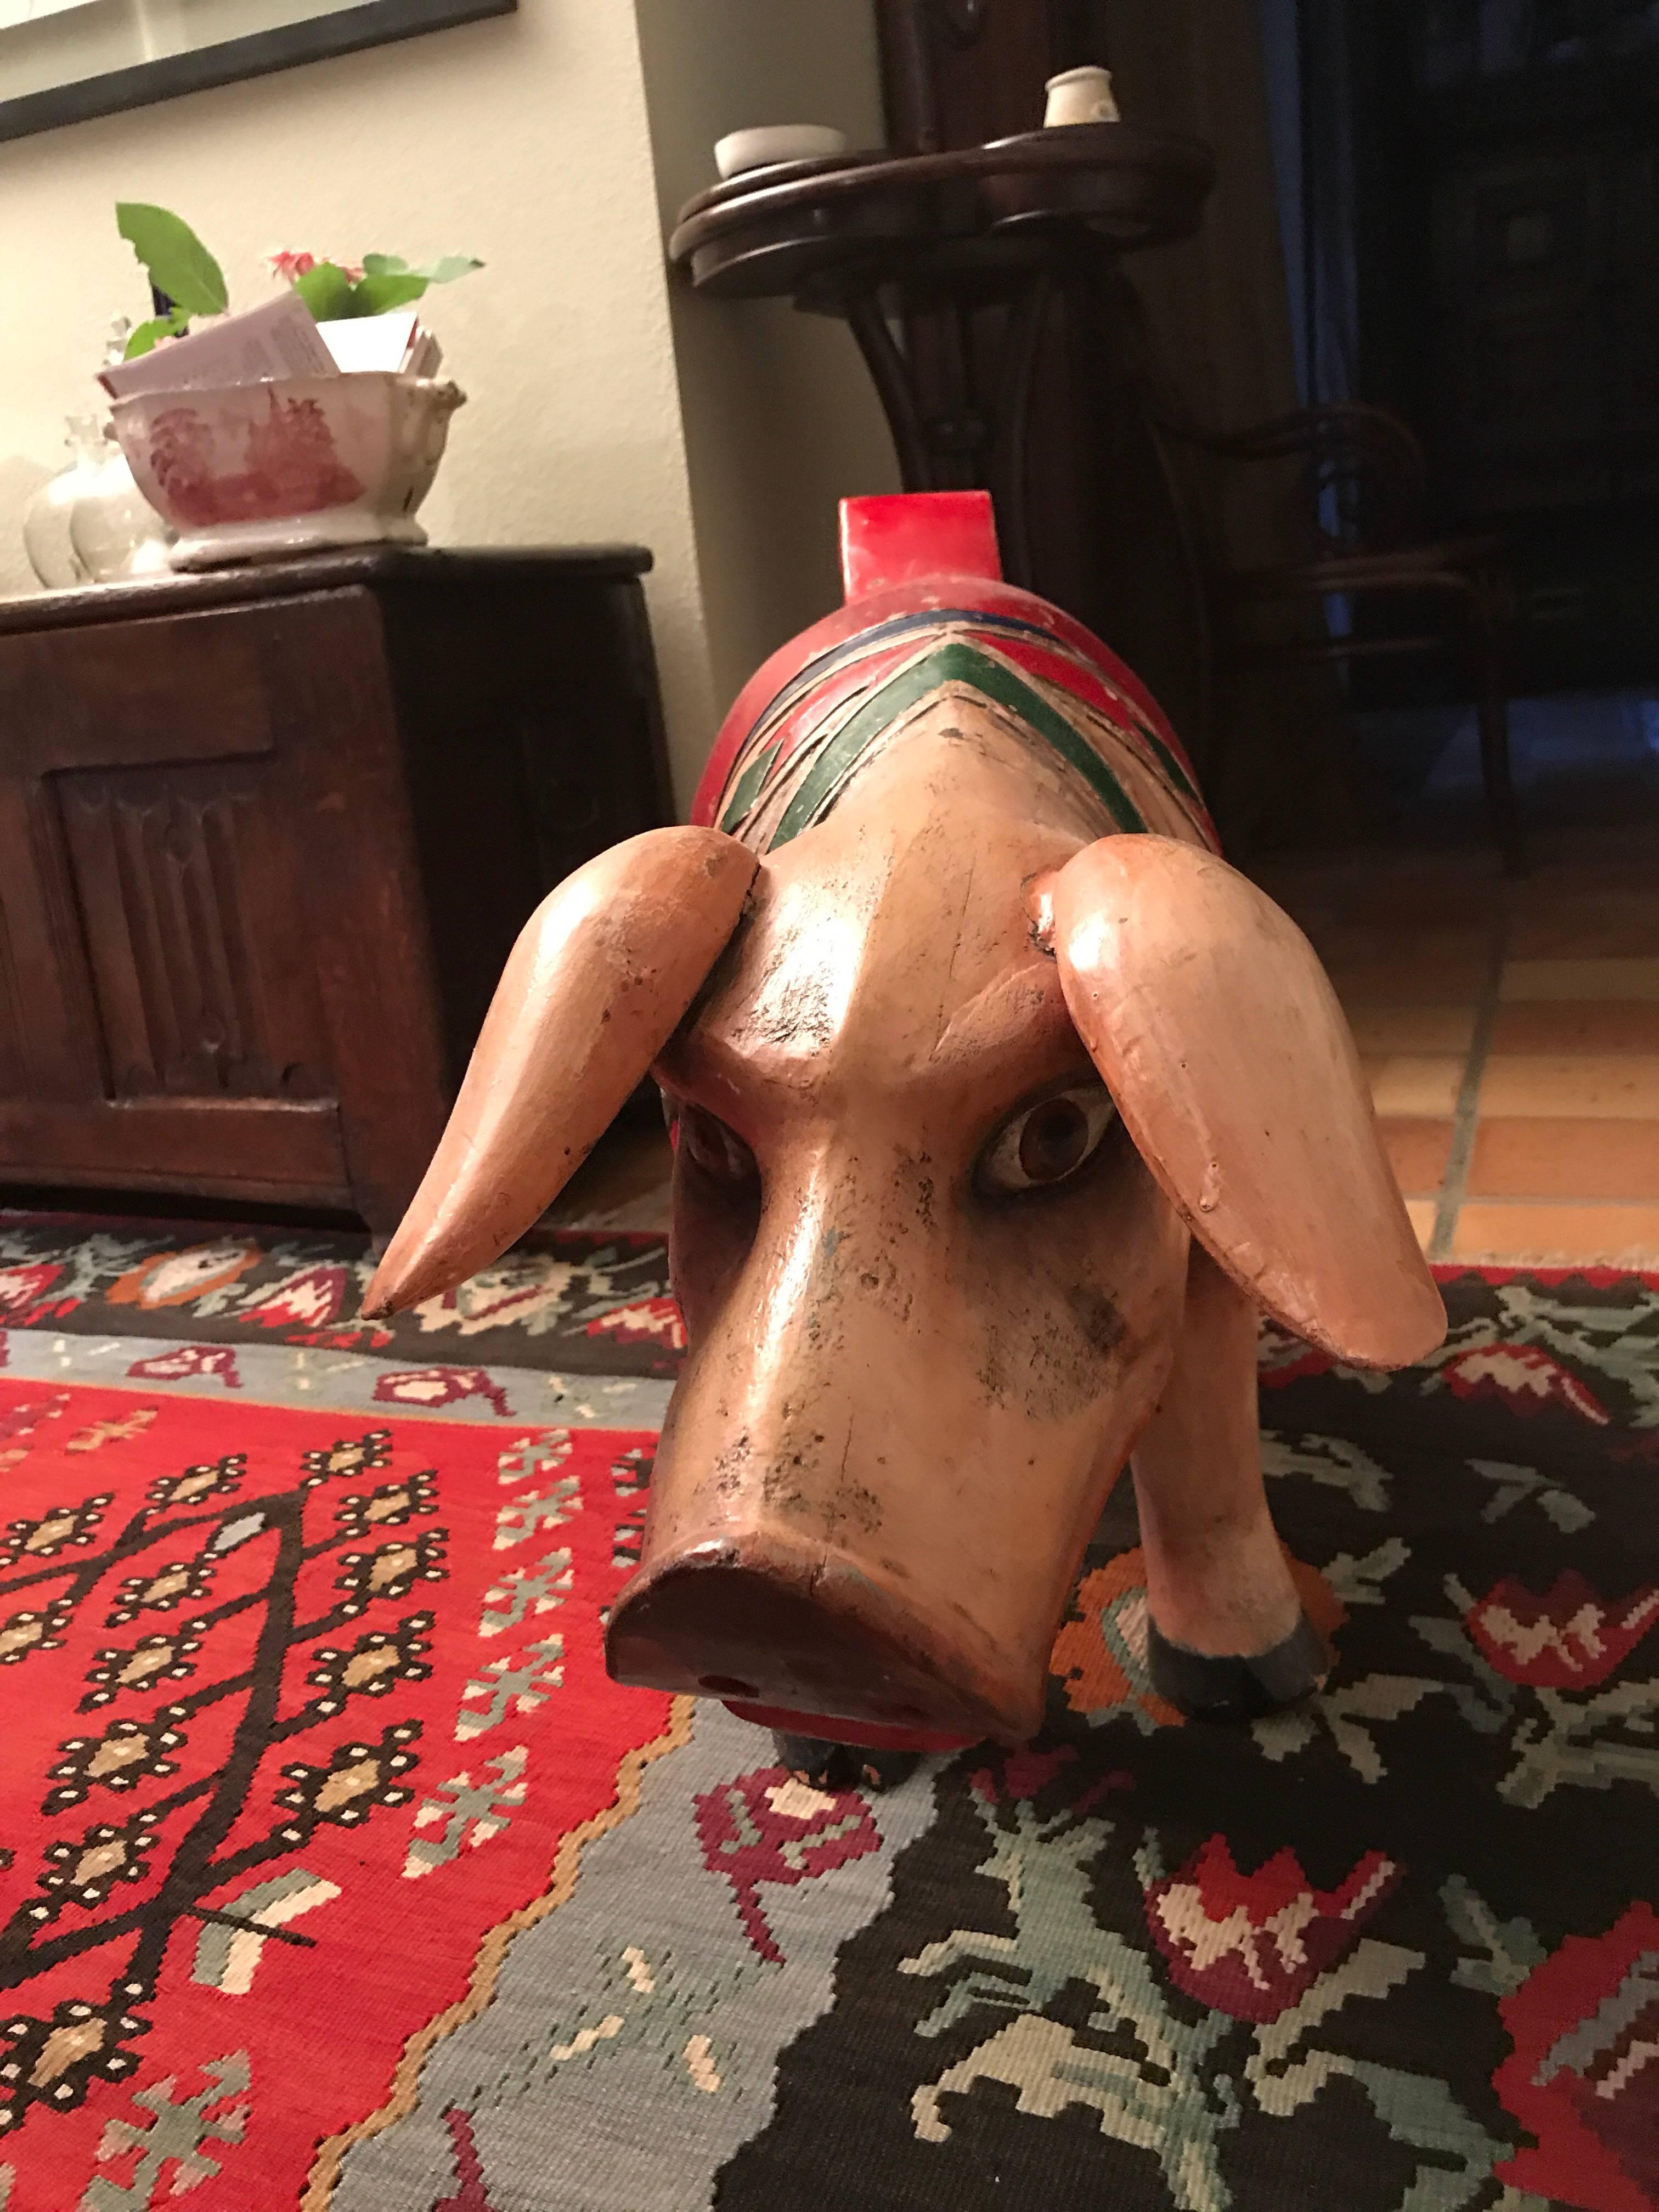 Wooden pig from a fair mill
To sit on for children
Hand-carved
Hand-painted
Unique and rare item from circa 1900. Measures: 90 x 25 x 50 cm very rare
There were normally two pigs on a mill and the second one slightly different can be obtained